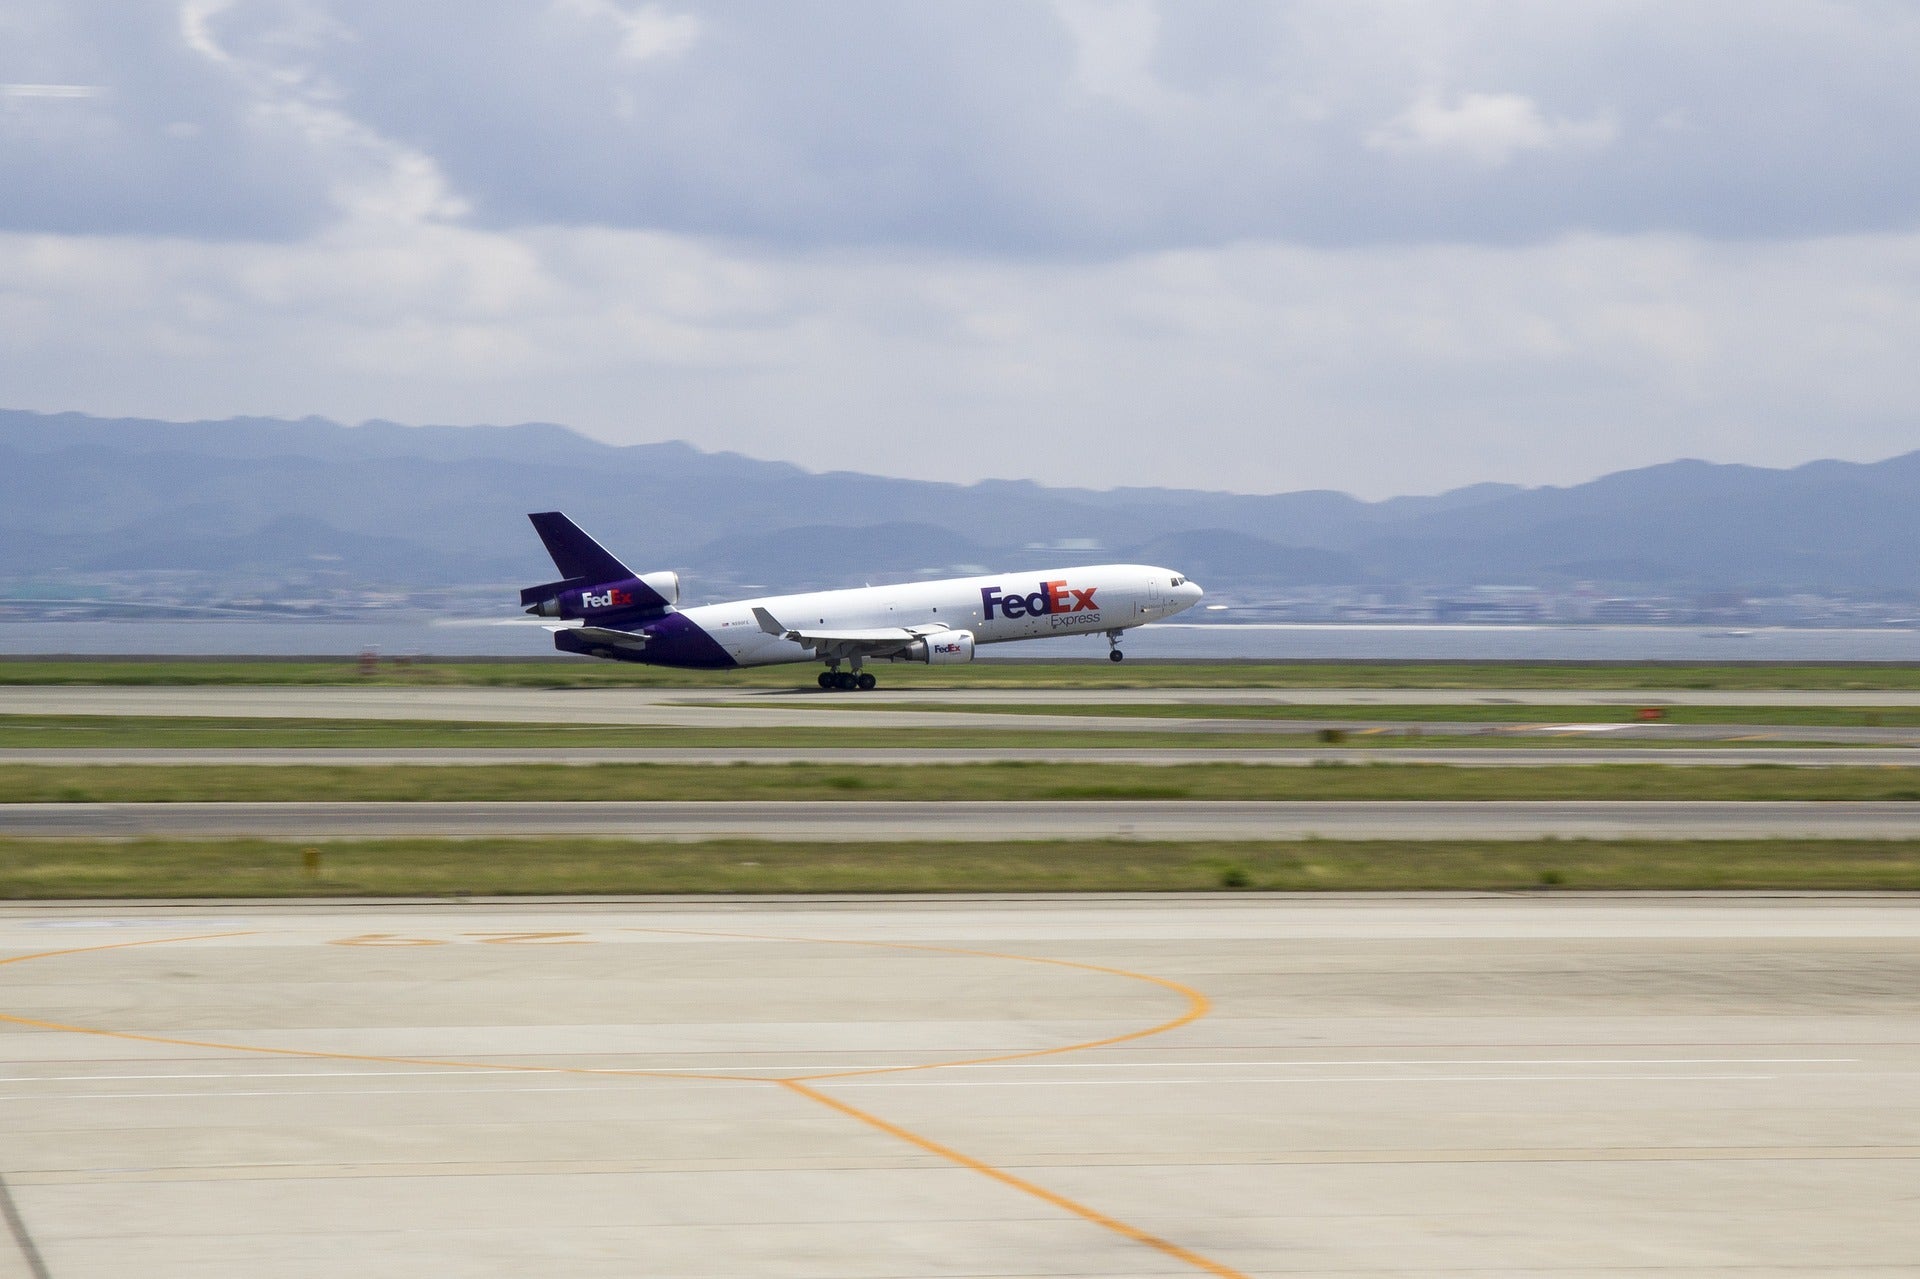 FedEx Trades Higher On Q4 Earnings Beat